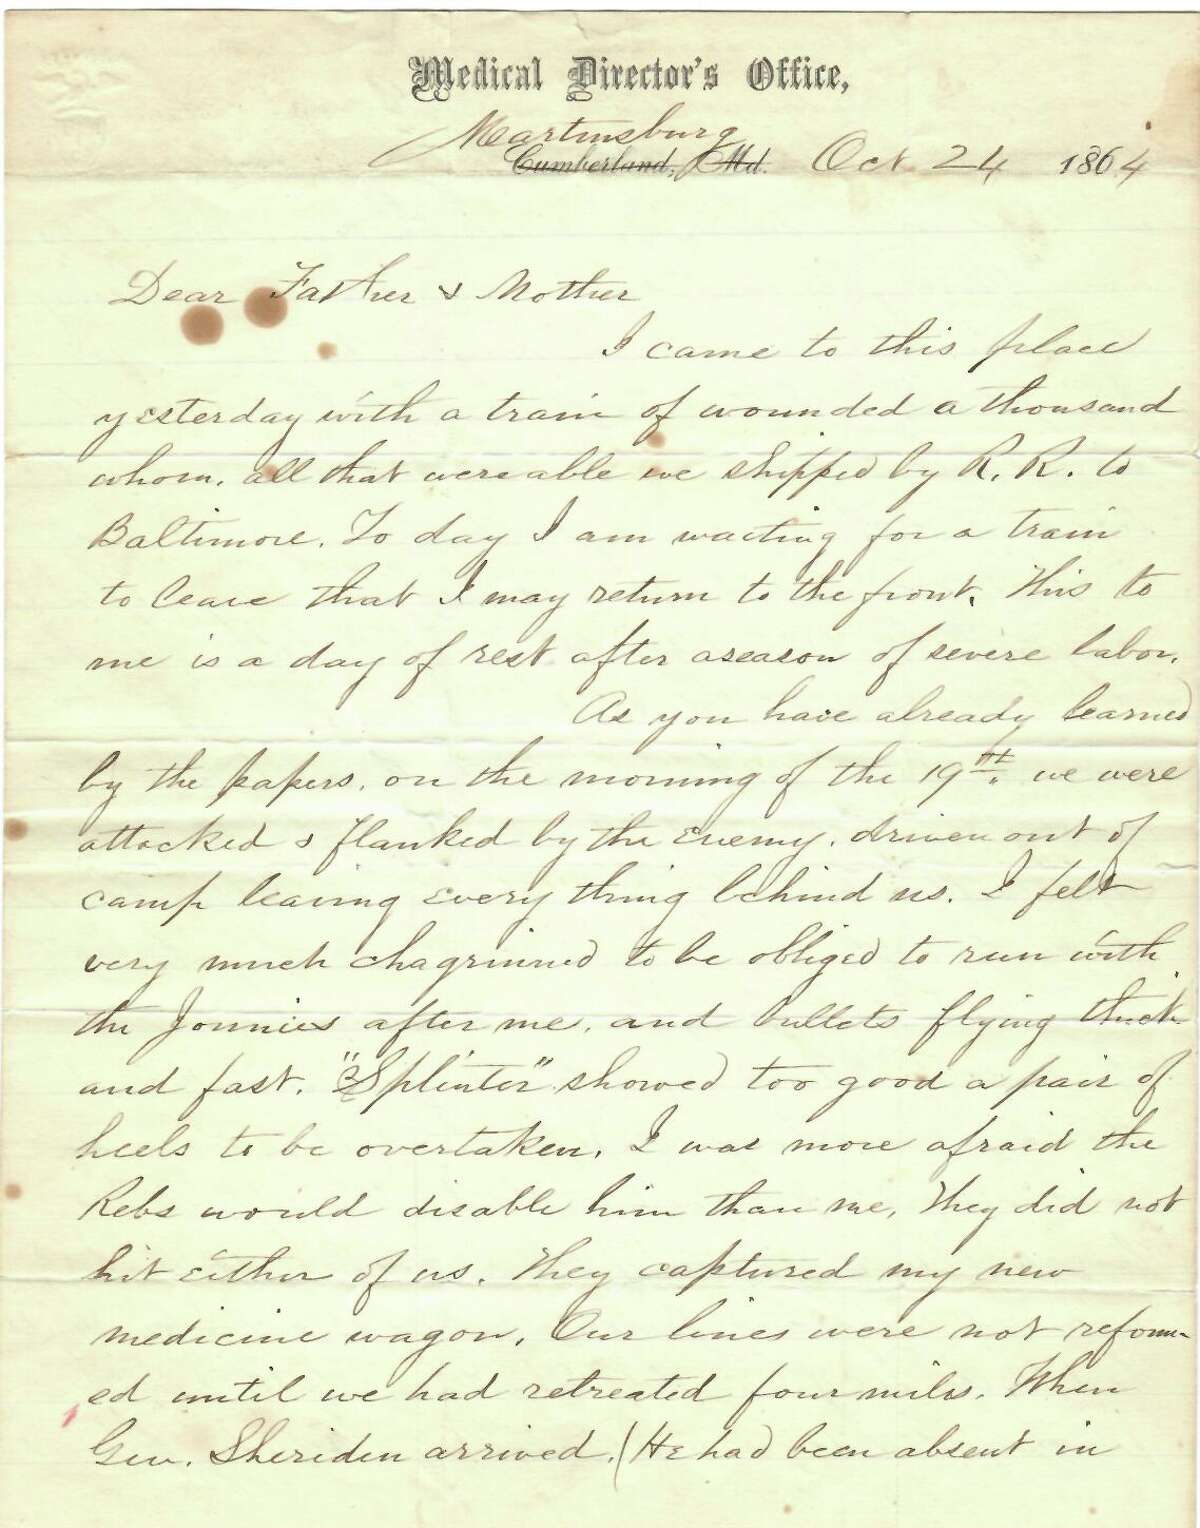 The Litchfield Historical Society recently acquired a collection of original letters from Dr. James Russell Cumming, a surgeon with the 12th Regiment of Connecticut Volunteers from 1862-1865.